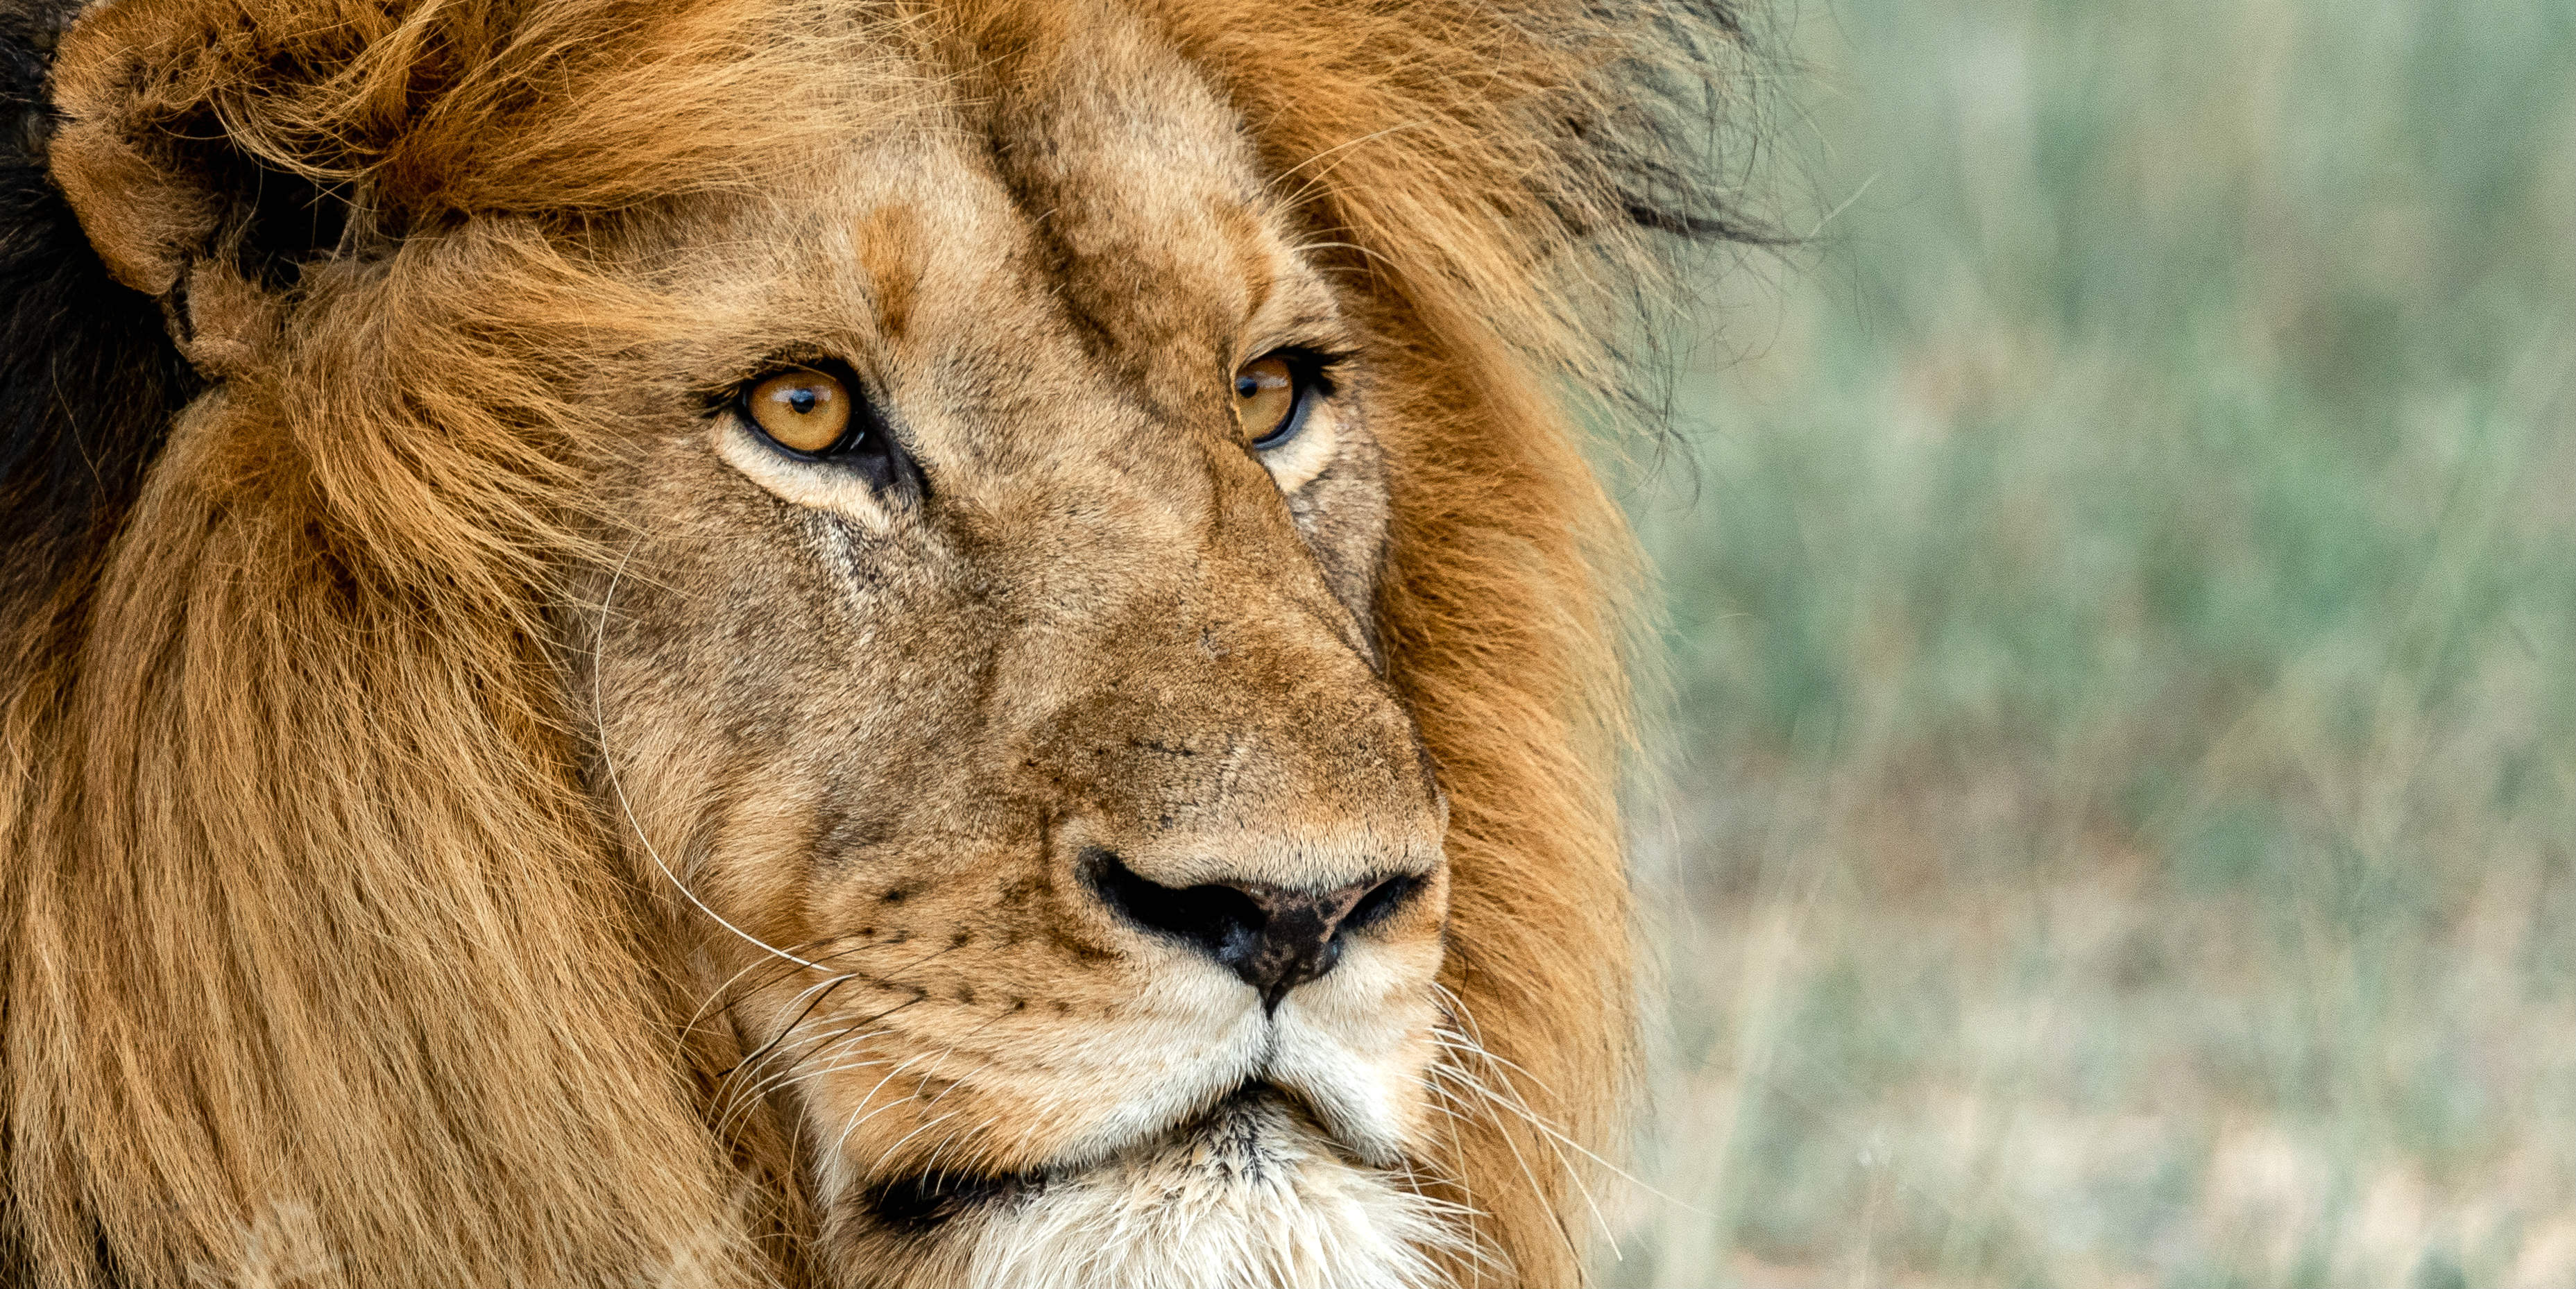 This close up image of a male lion was captured by a GVI participant while volunteering in Africa with animals.